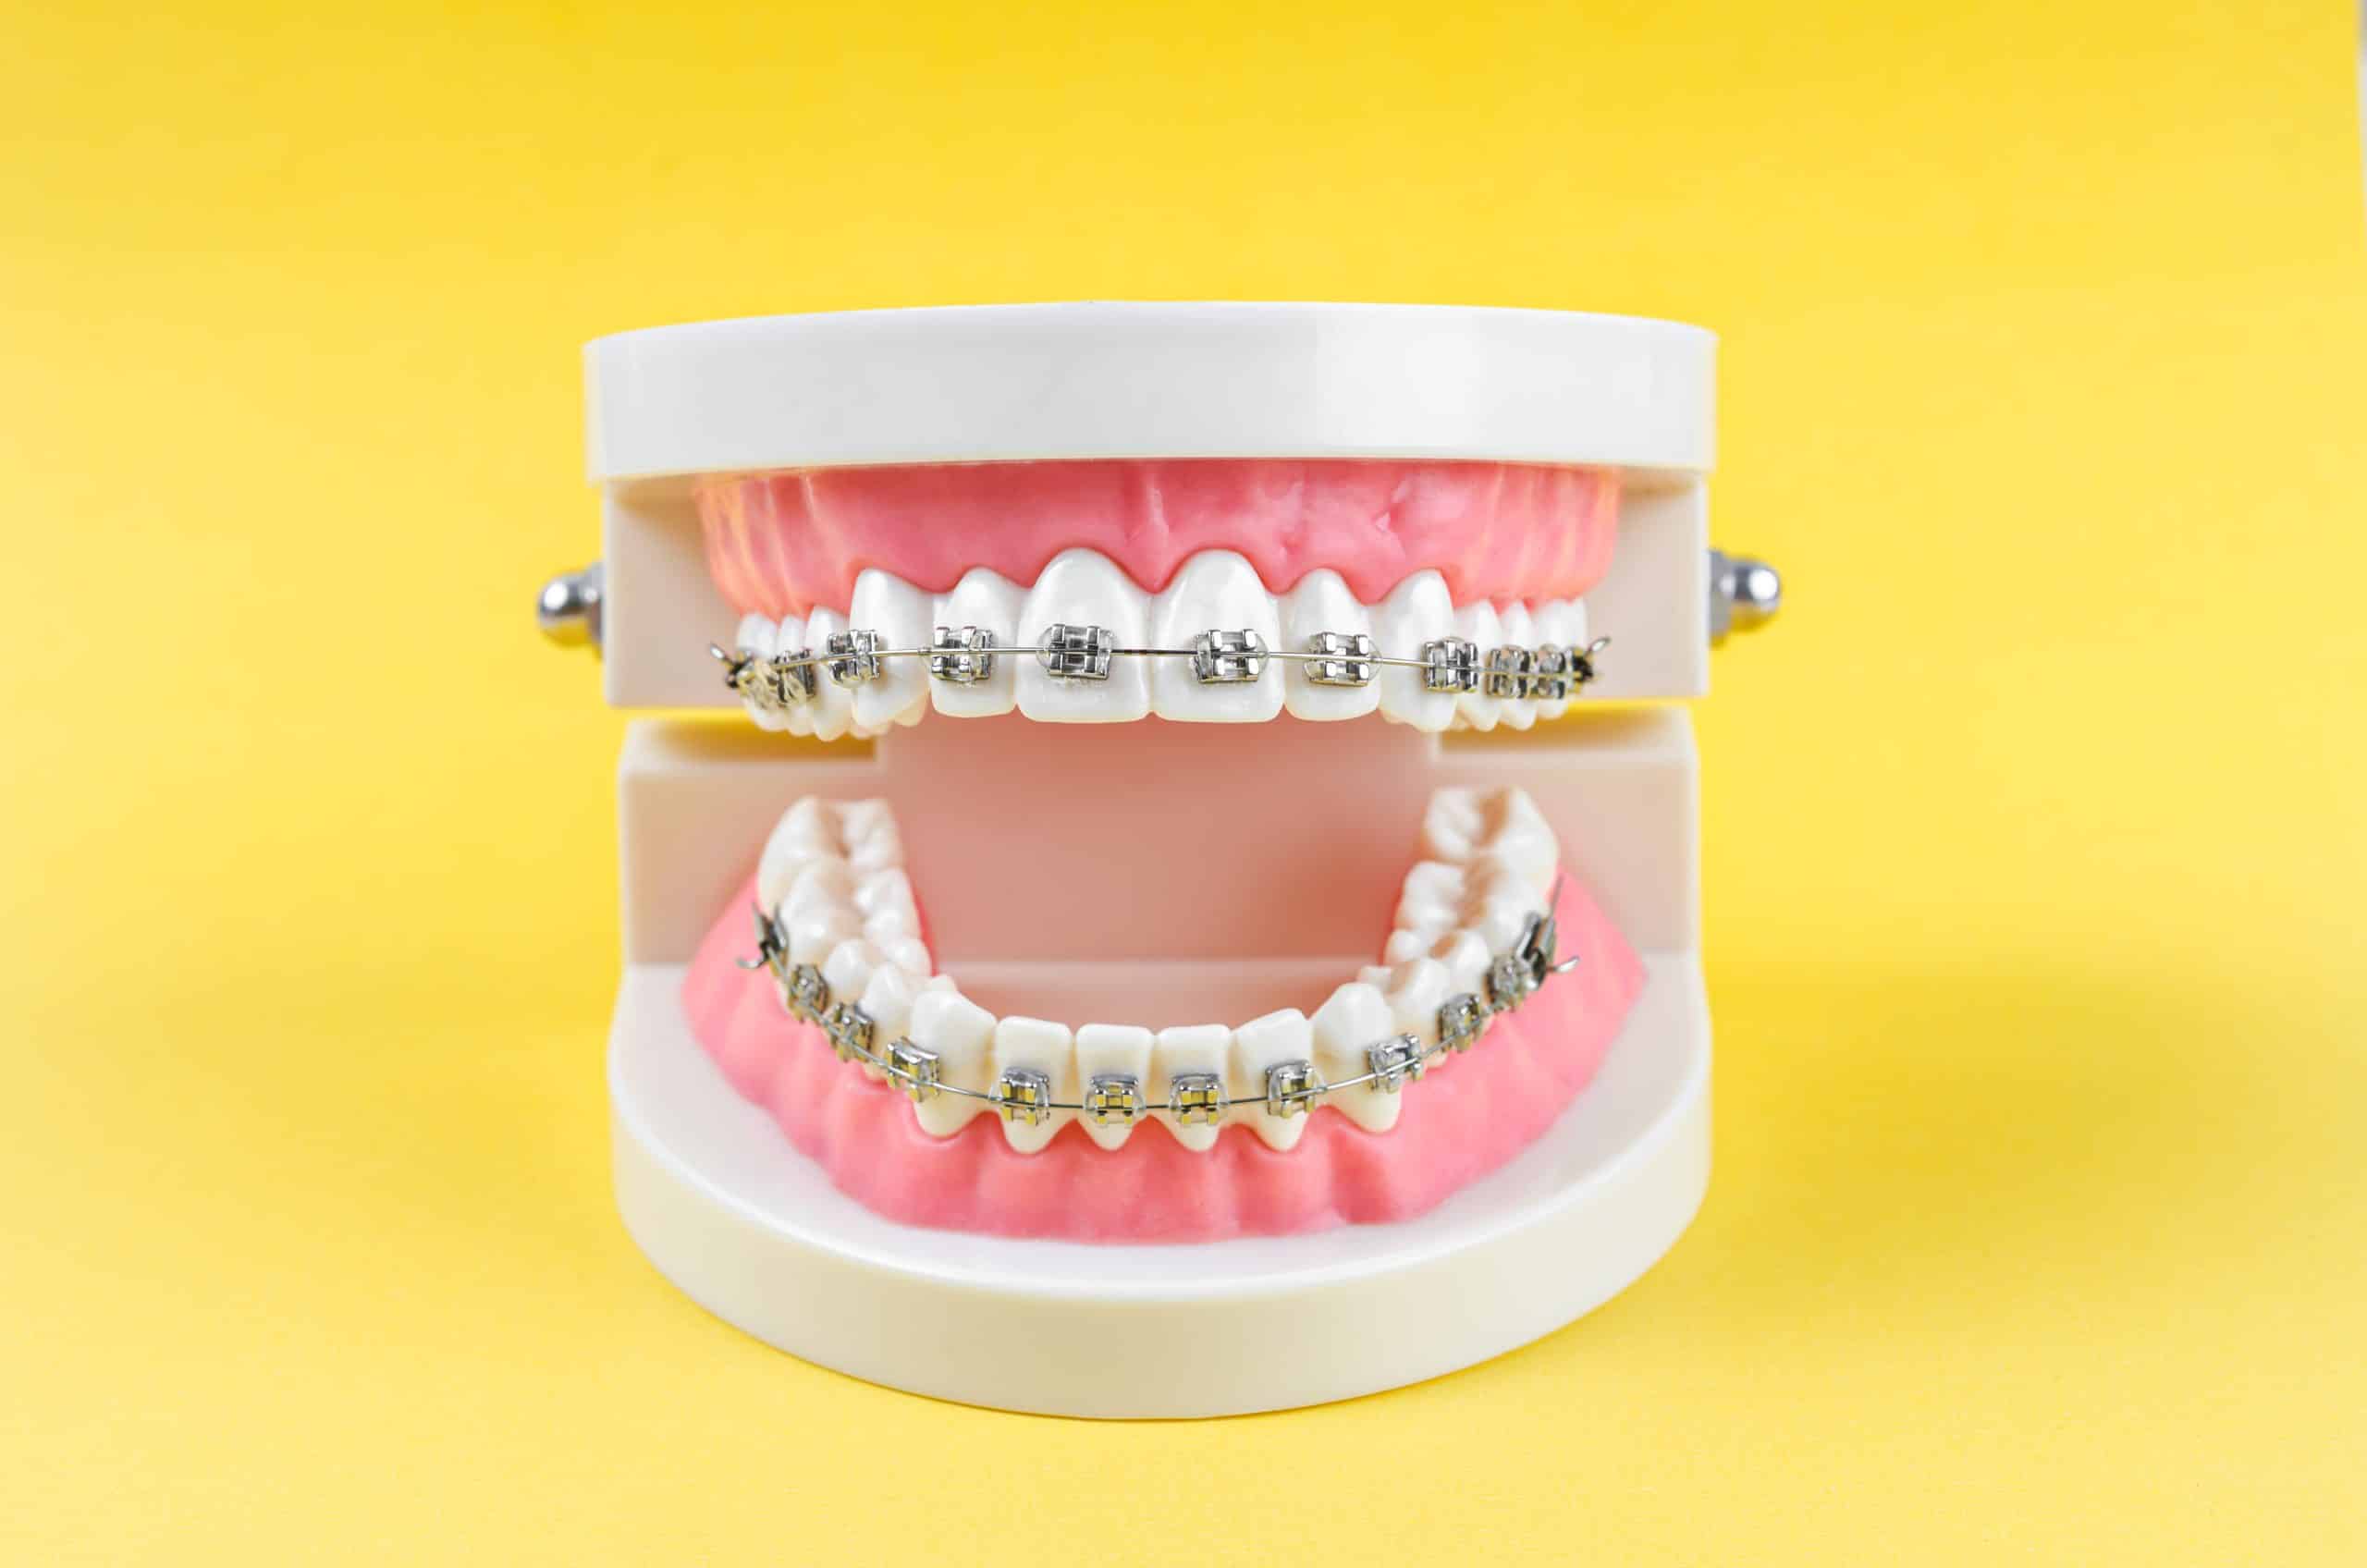 What is the cost of dental braces?